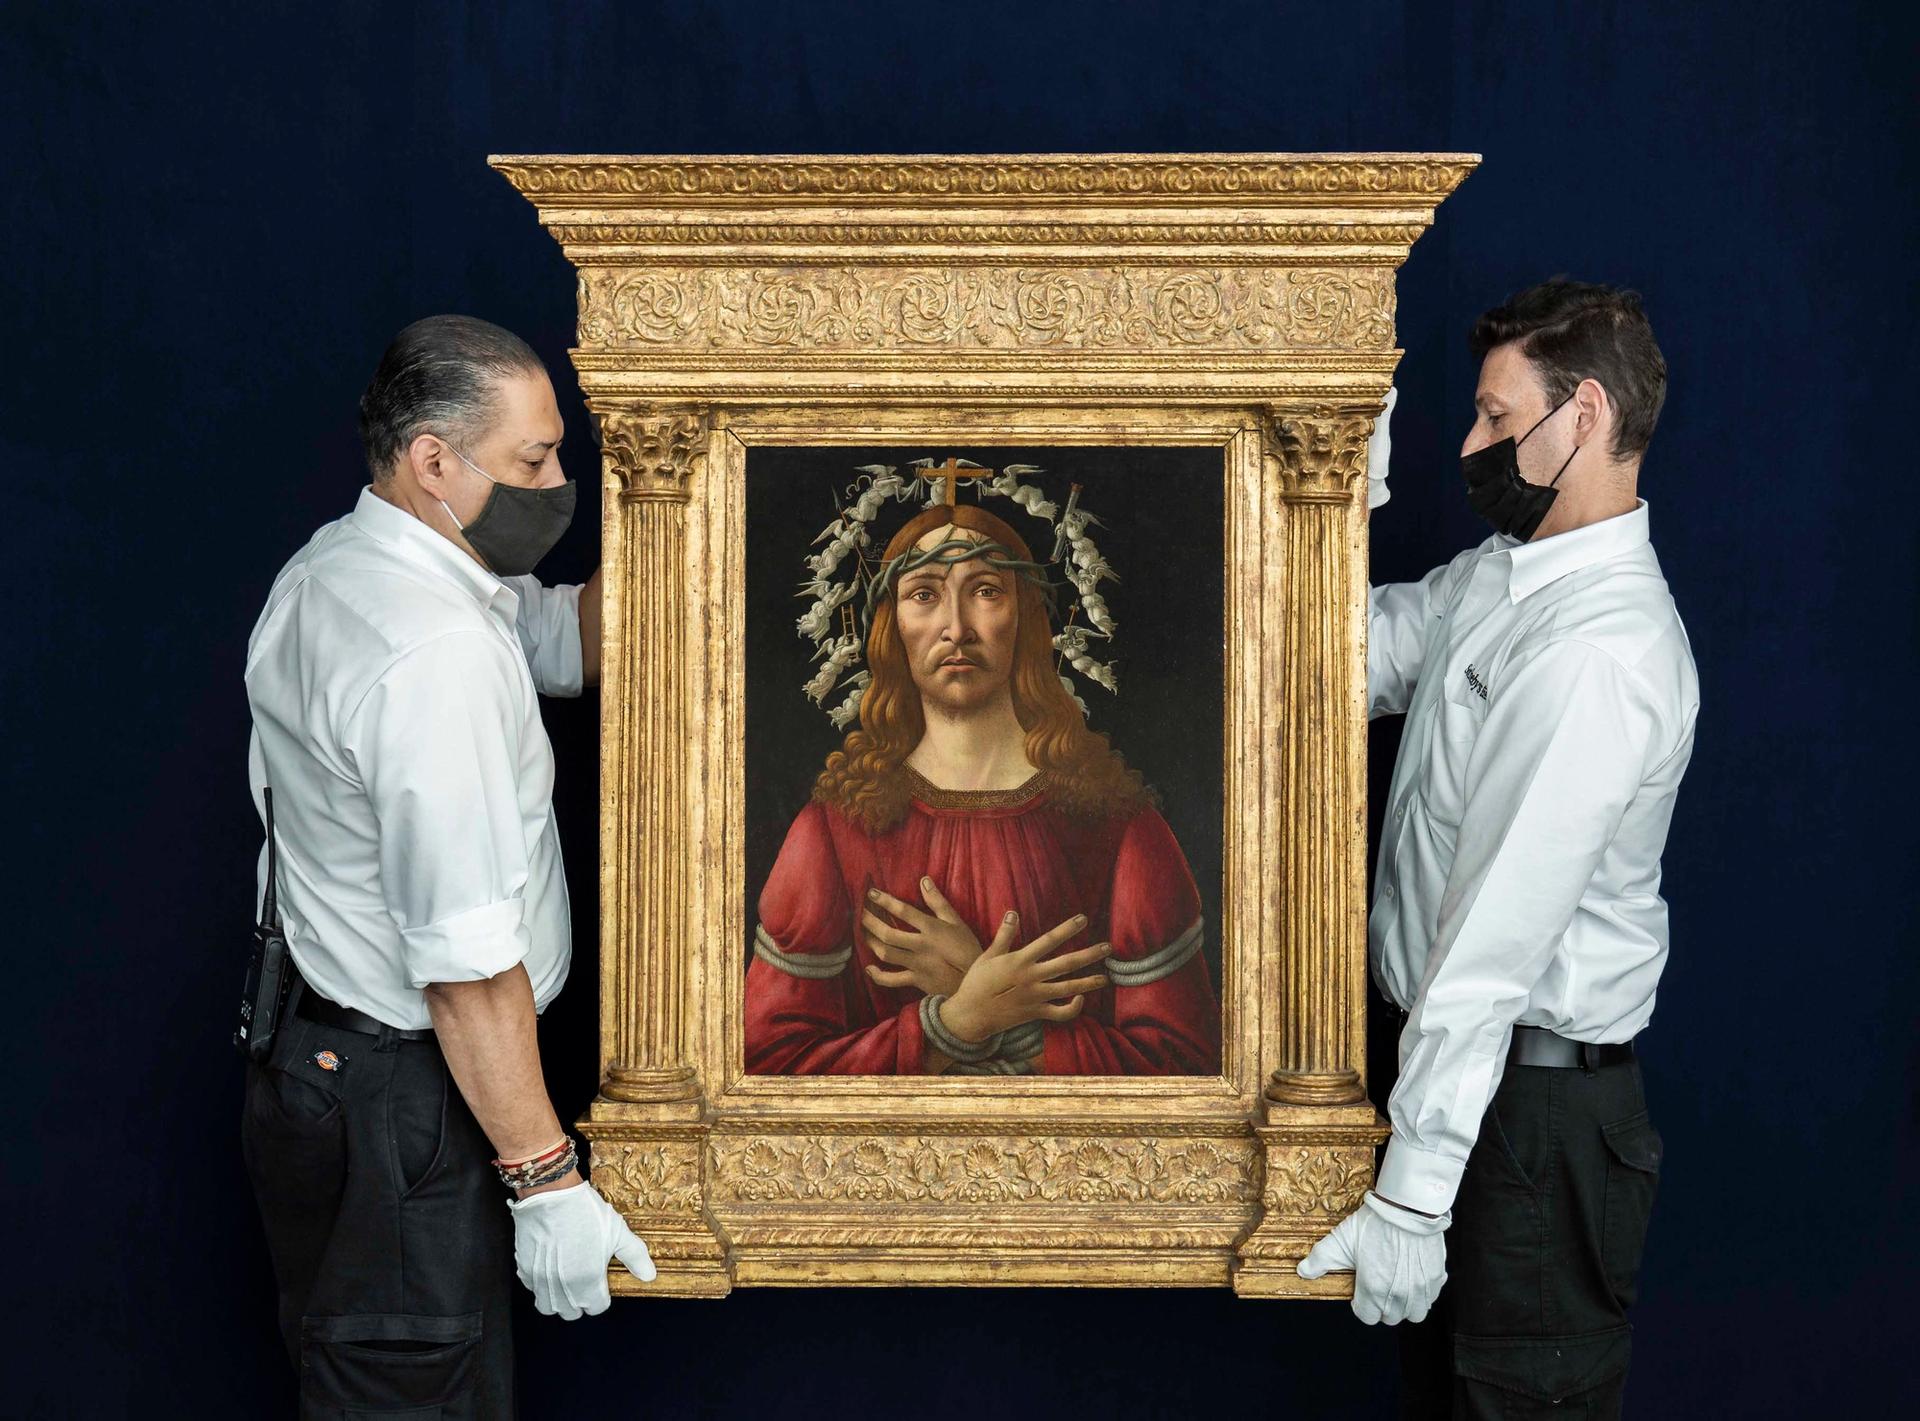 Botticelli's Man of Sorrows was sold at Sotheby's last week

Courtesy of Sotheby's